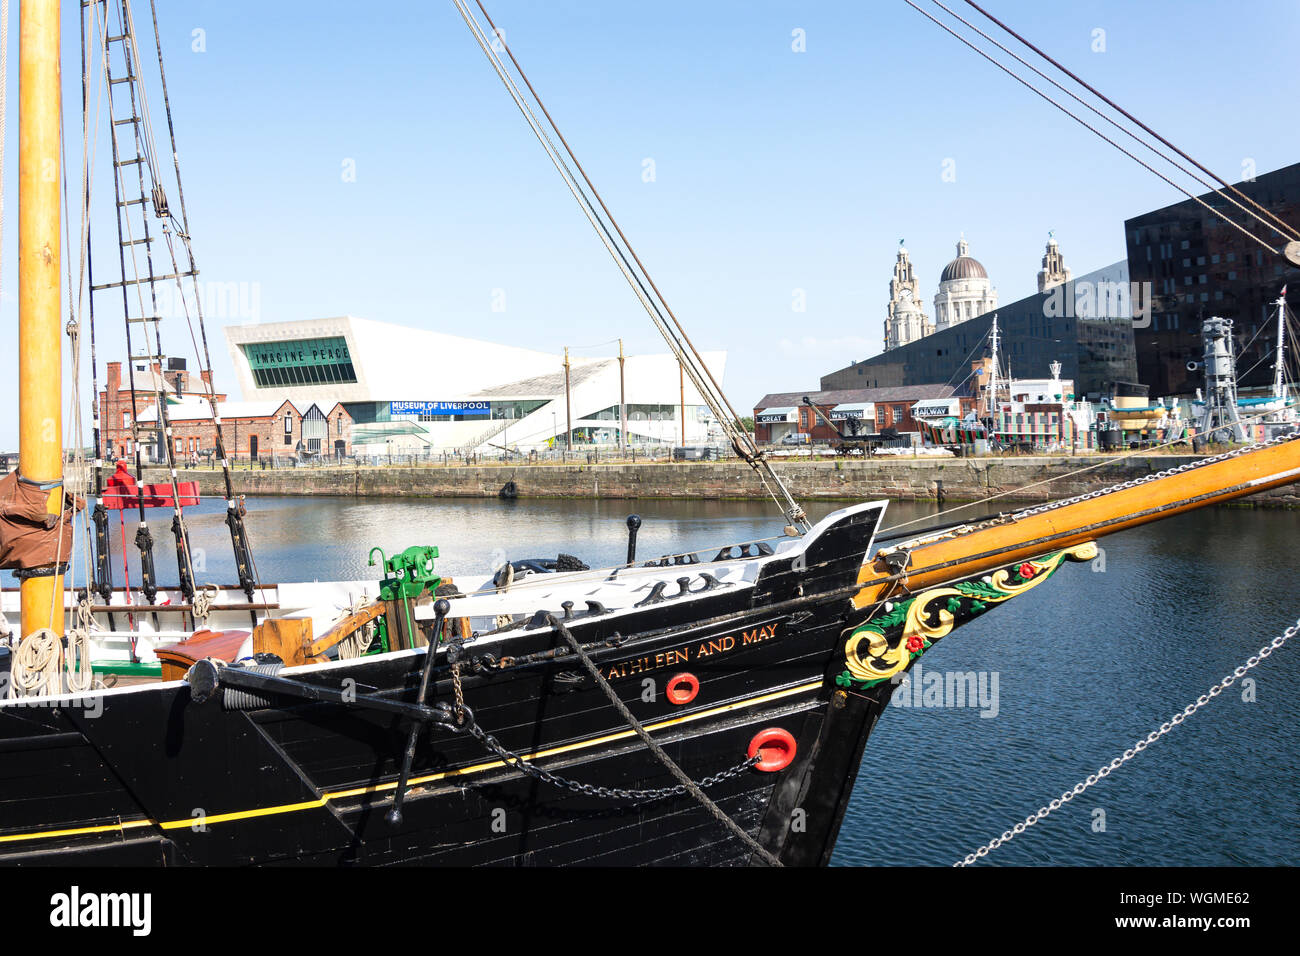 'Kathleen and May' historic sail schooner and Museum of Liverpool, Royal Albert Dock, Liverpool Waterfront, Liverpool, Merseyside, England, United Kin Stock Photo